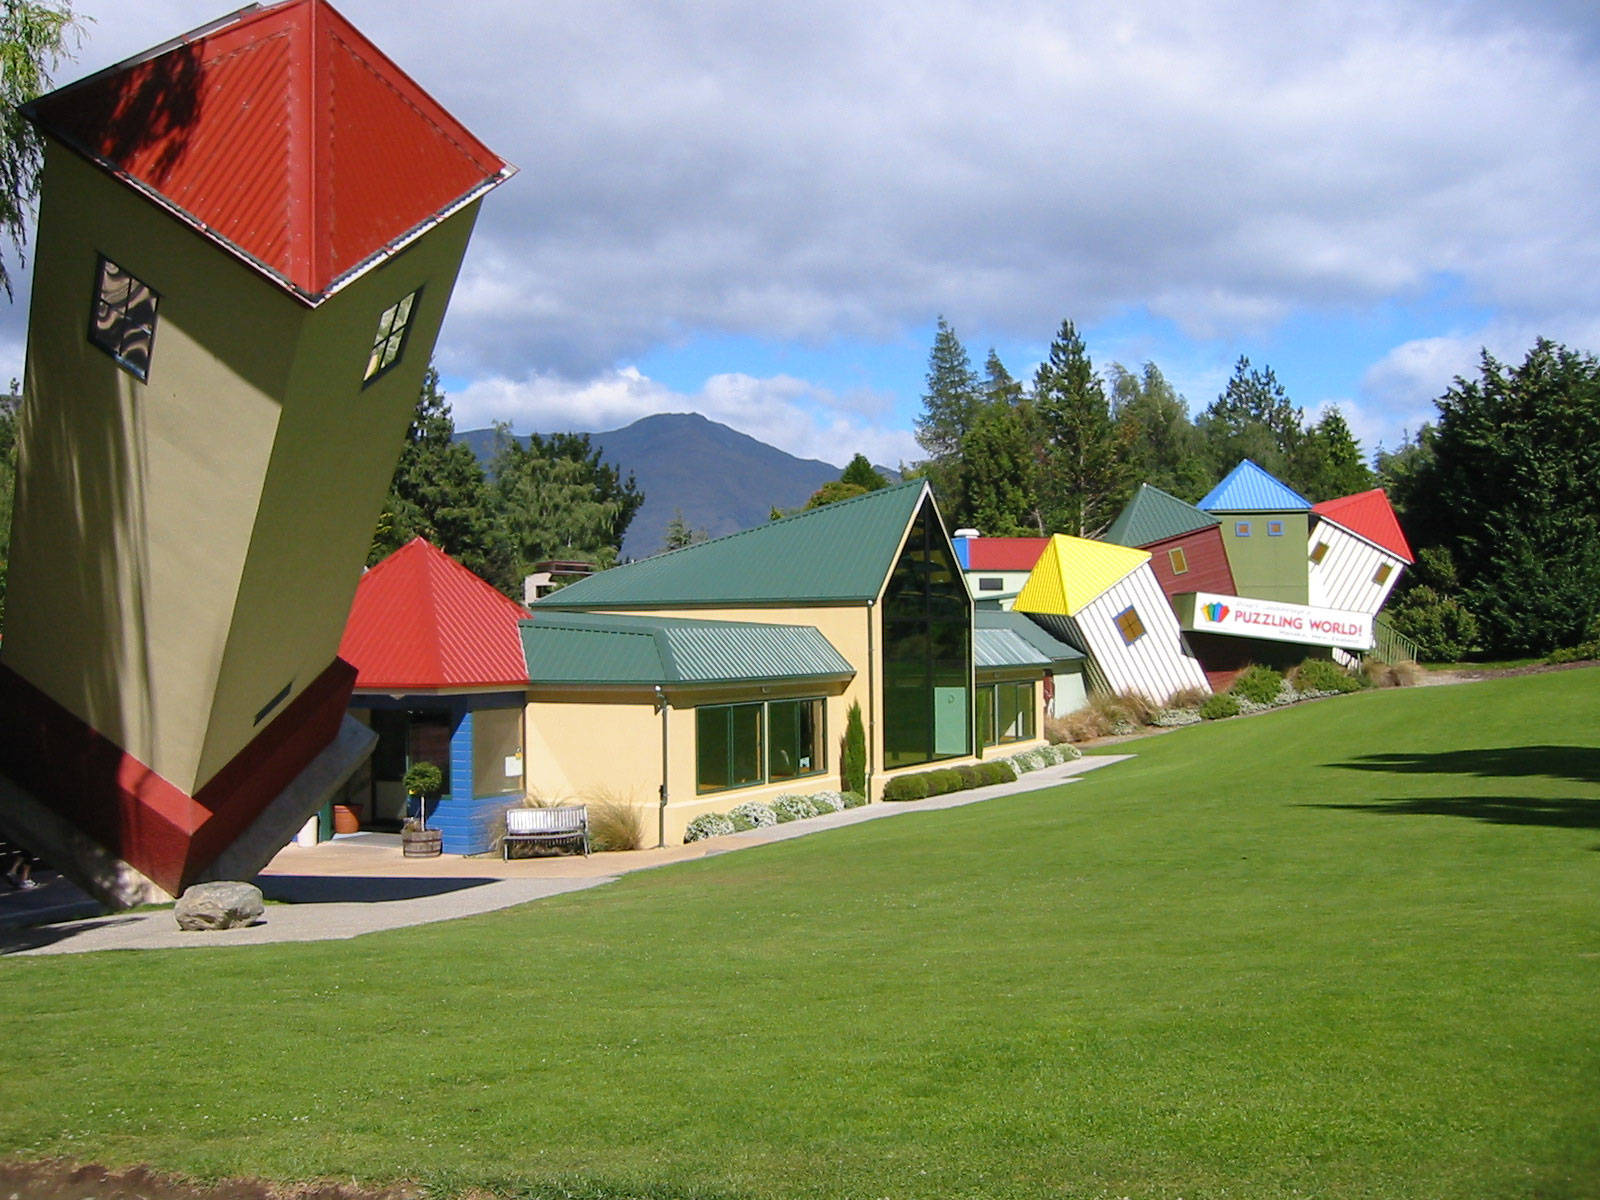 Crooked House In The Puzzling World Of Wanaka Wallpaper